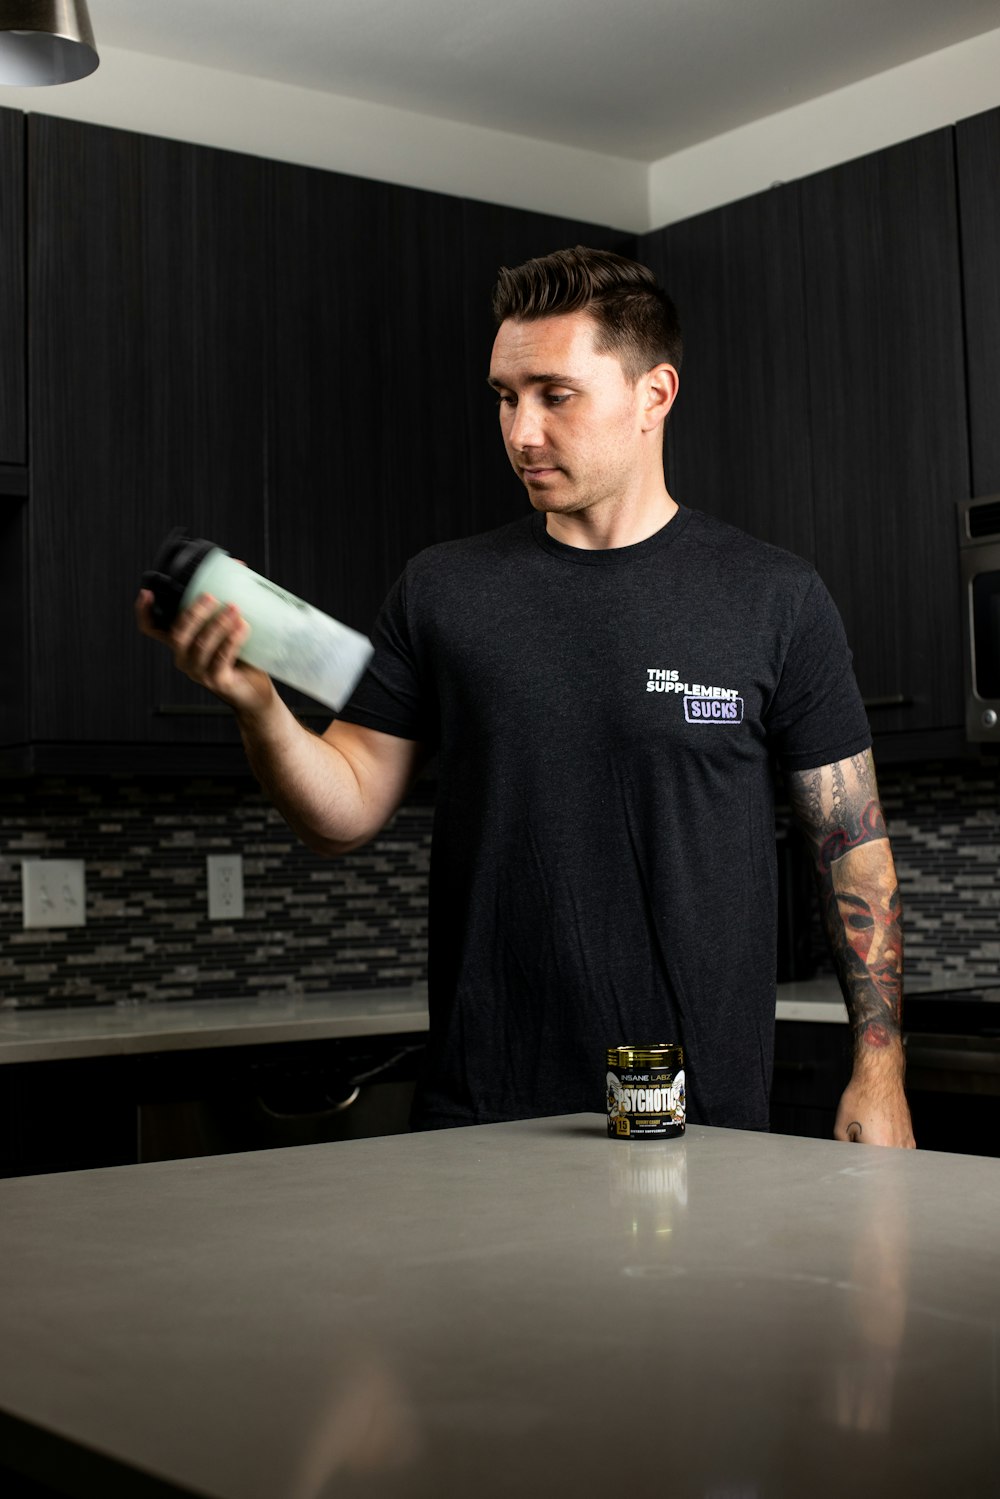 a man standing in a kitchen holding a can of soda